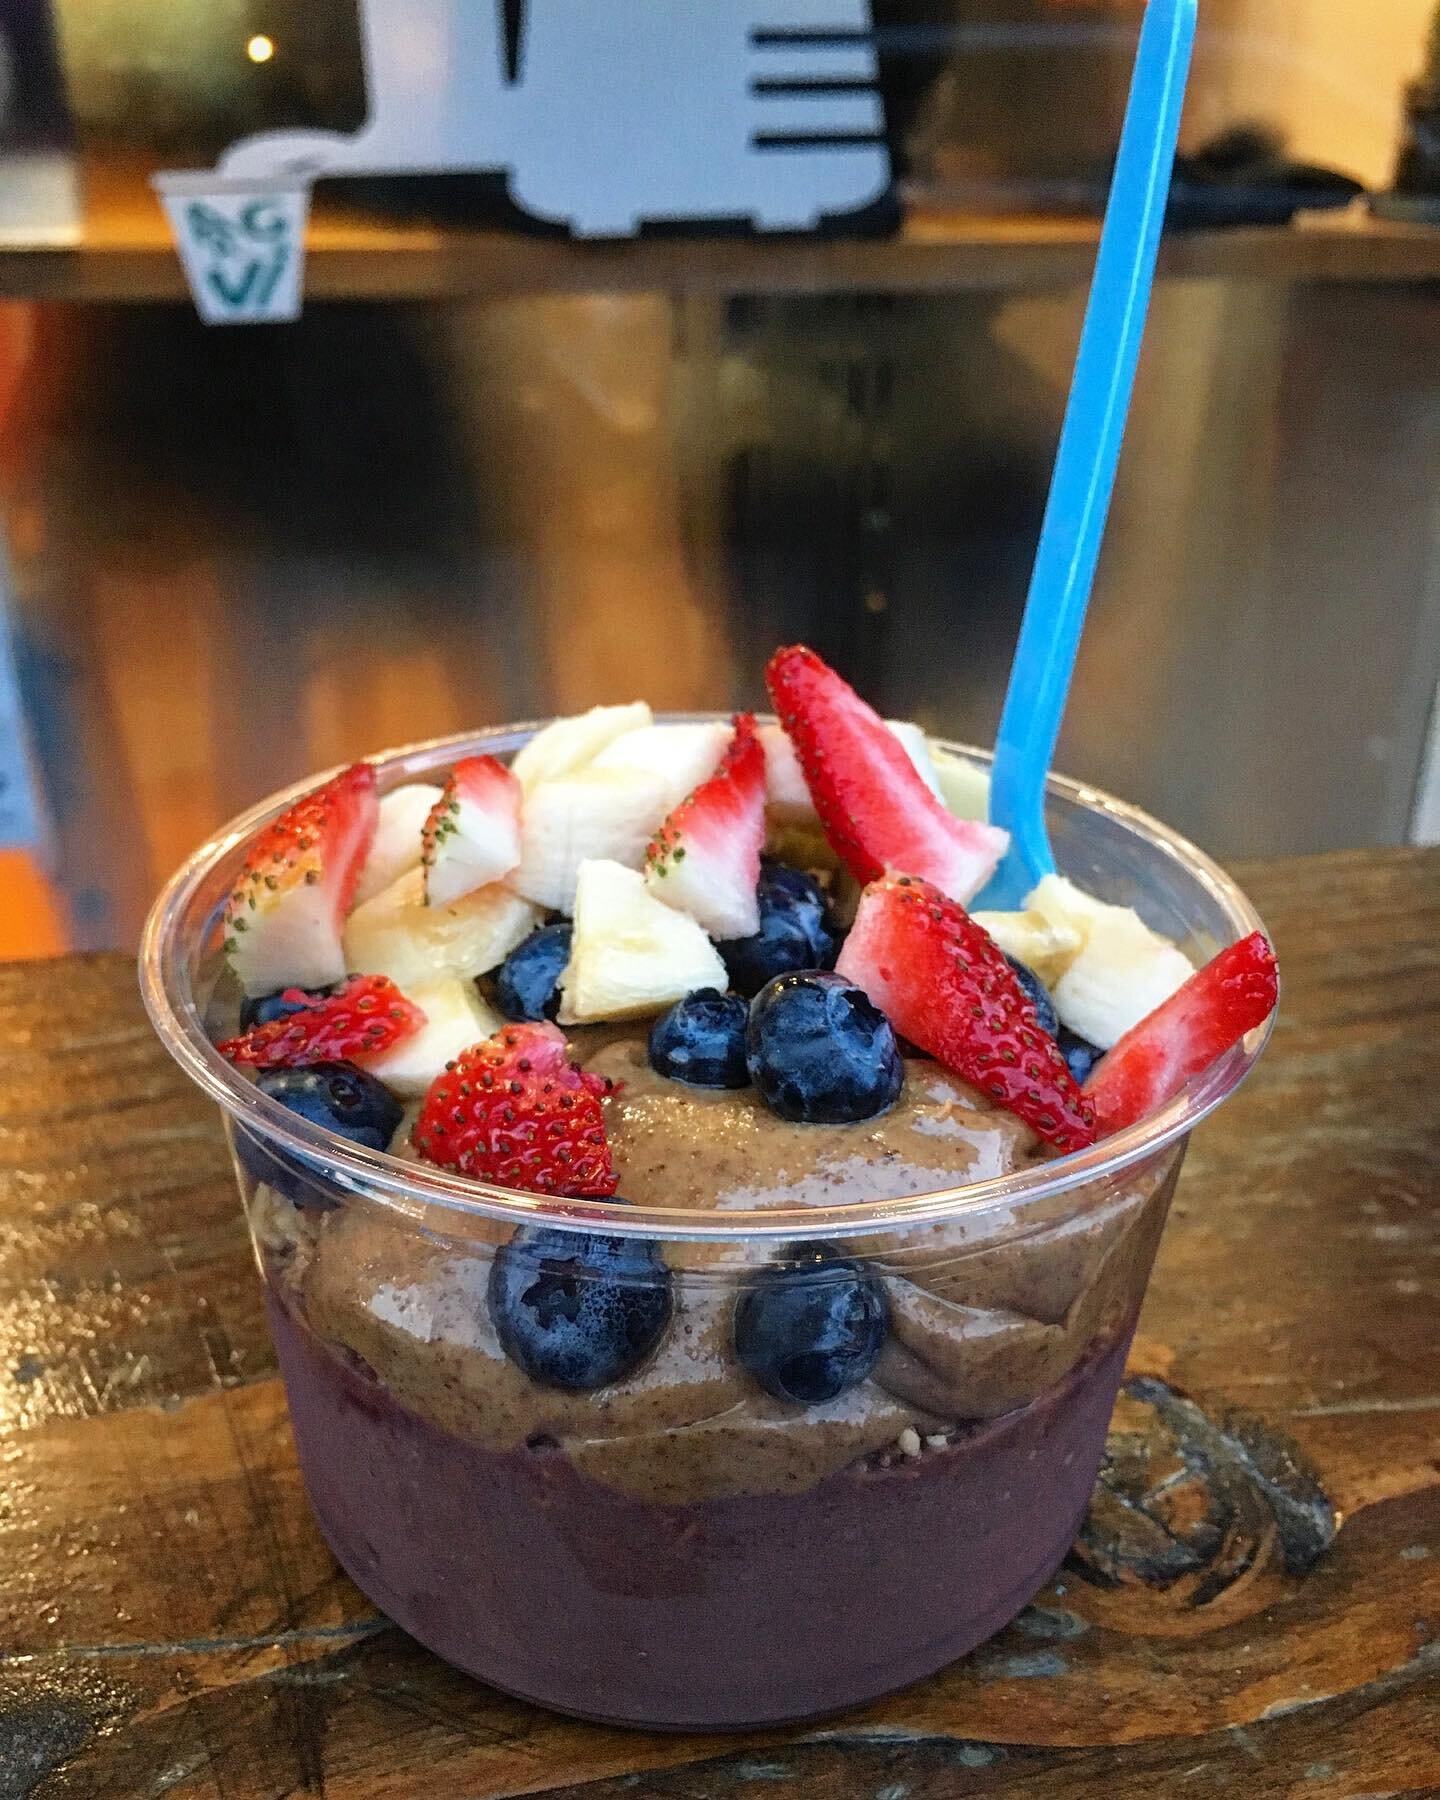 Been a minute 👀

📍 EAST VILLAGE
💌 Catering: info@agavijuice.com
✨ 100% Raw 100% Vegan 100% Love
🏳️&zwj;🌈 Proudly serving organic acai bowls &amp; juices!
📸 Tag us in your #AGAVI photos!
.
.
AGAVI JUICE | NYC
#agavijuice 💚 #agavinyc
#agavi #nyc